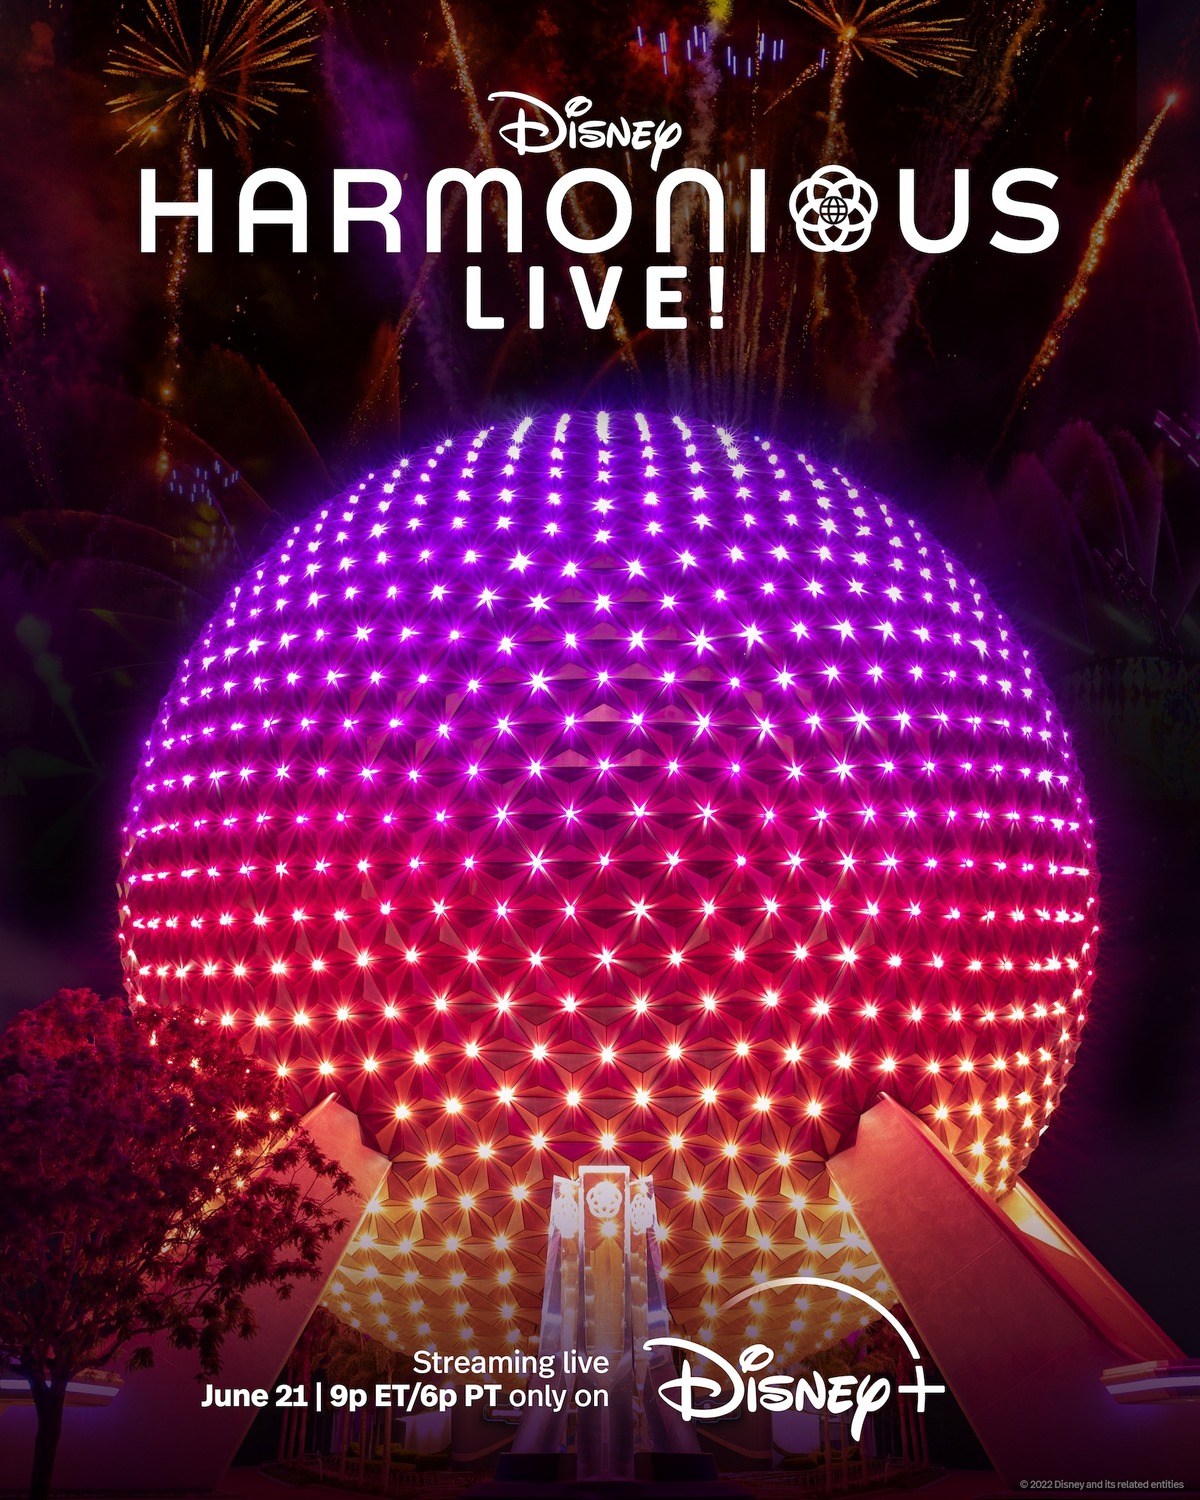 Extra Large TV Poster Image for Harmonious Live! 